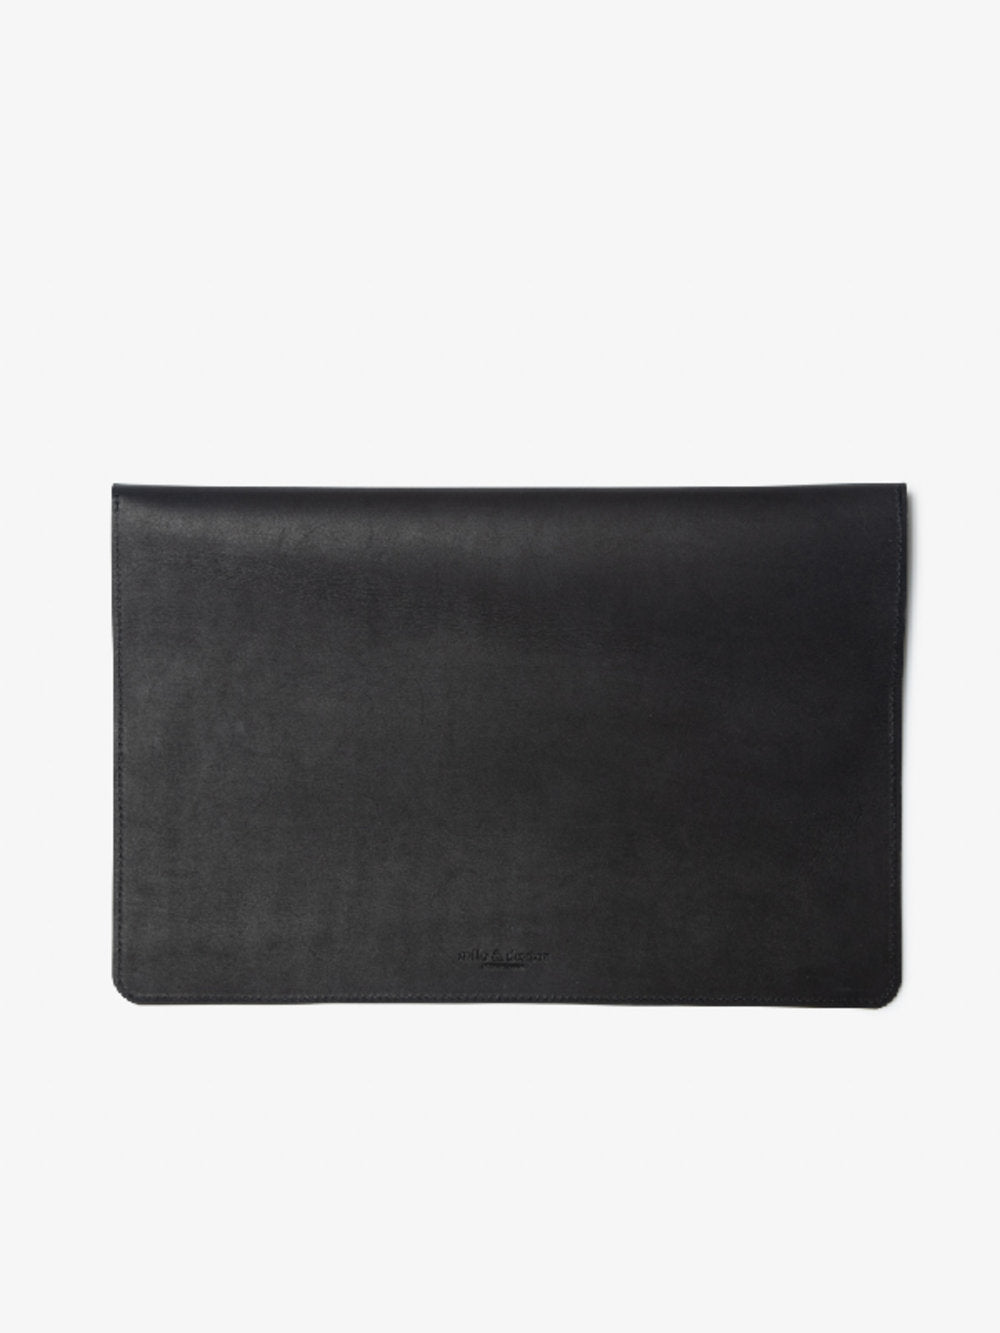 Milo & Dexter - SS24 - Classic Leather Laptop Sleeve in Black - full display 2